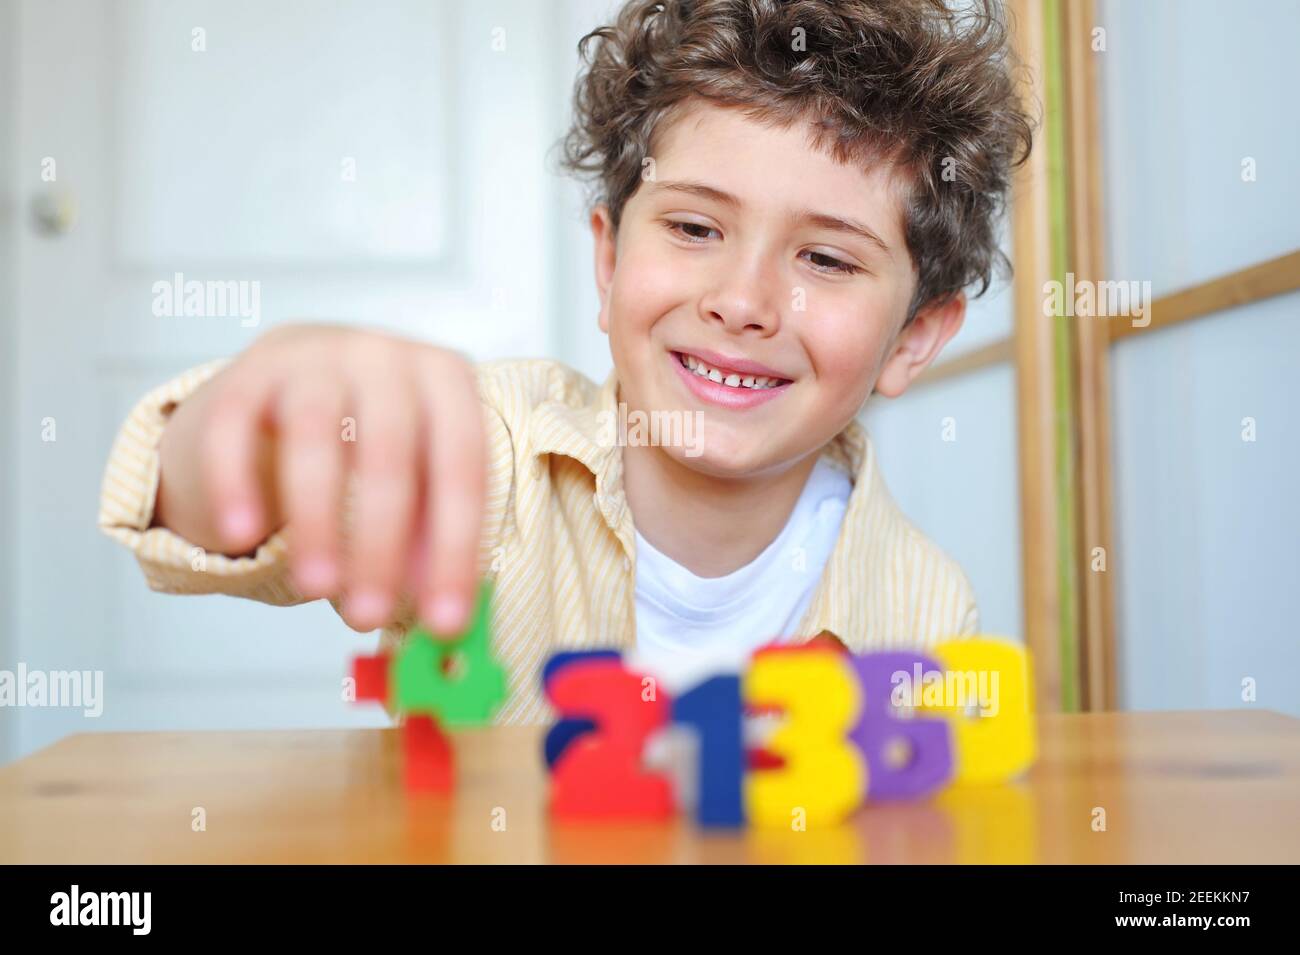 Cute little boy puts wooden numbers on the table Stock Photo